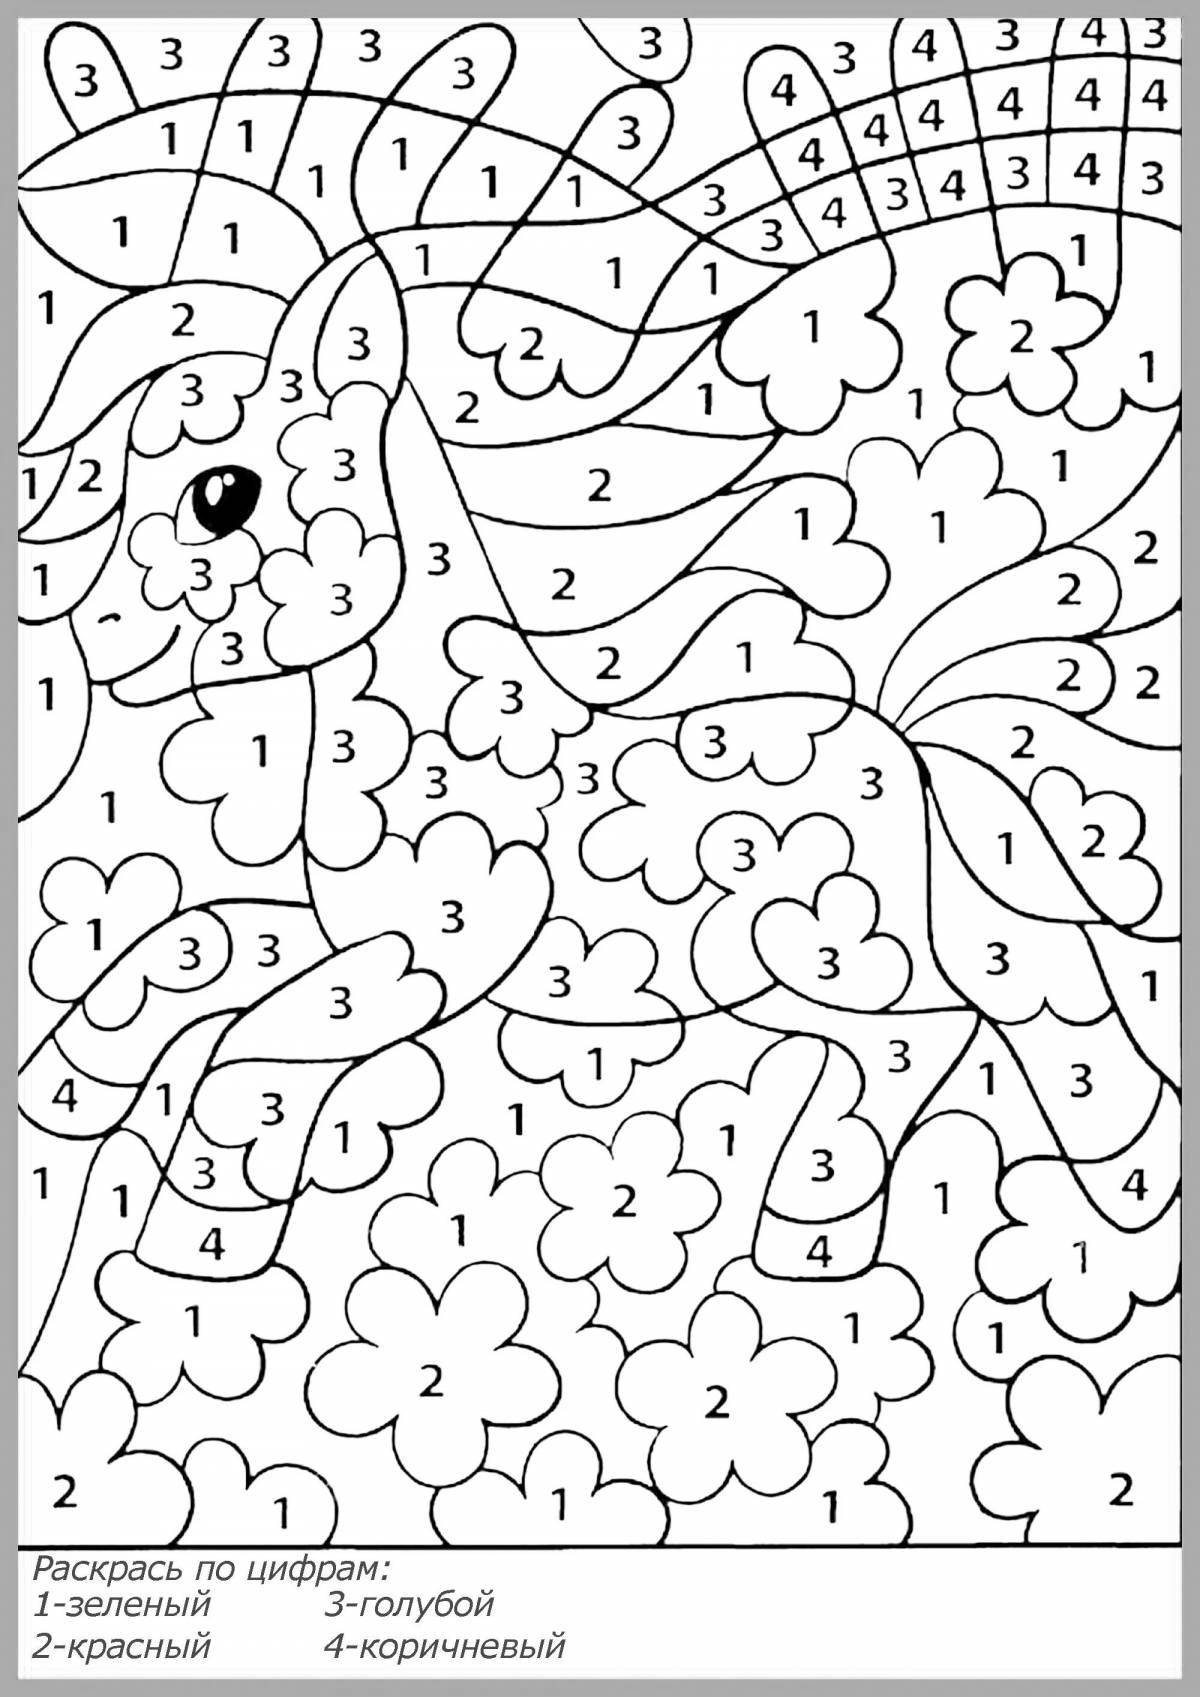 Educational coloring by numbers for children 8-9 years old